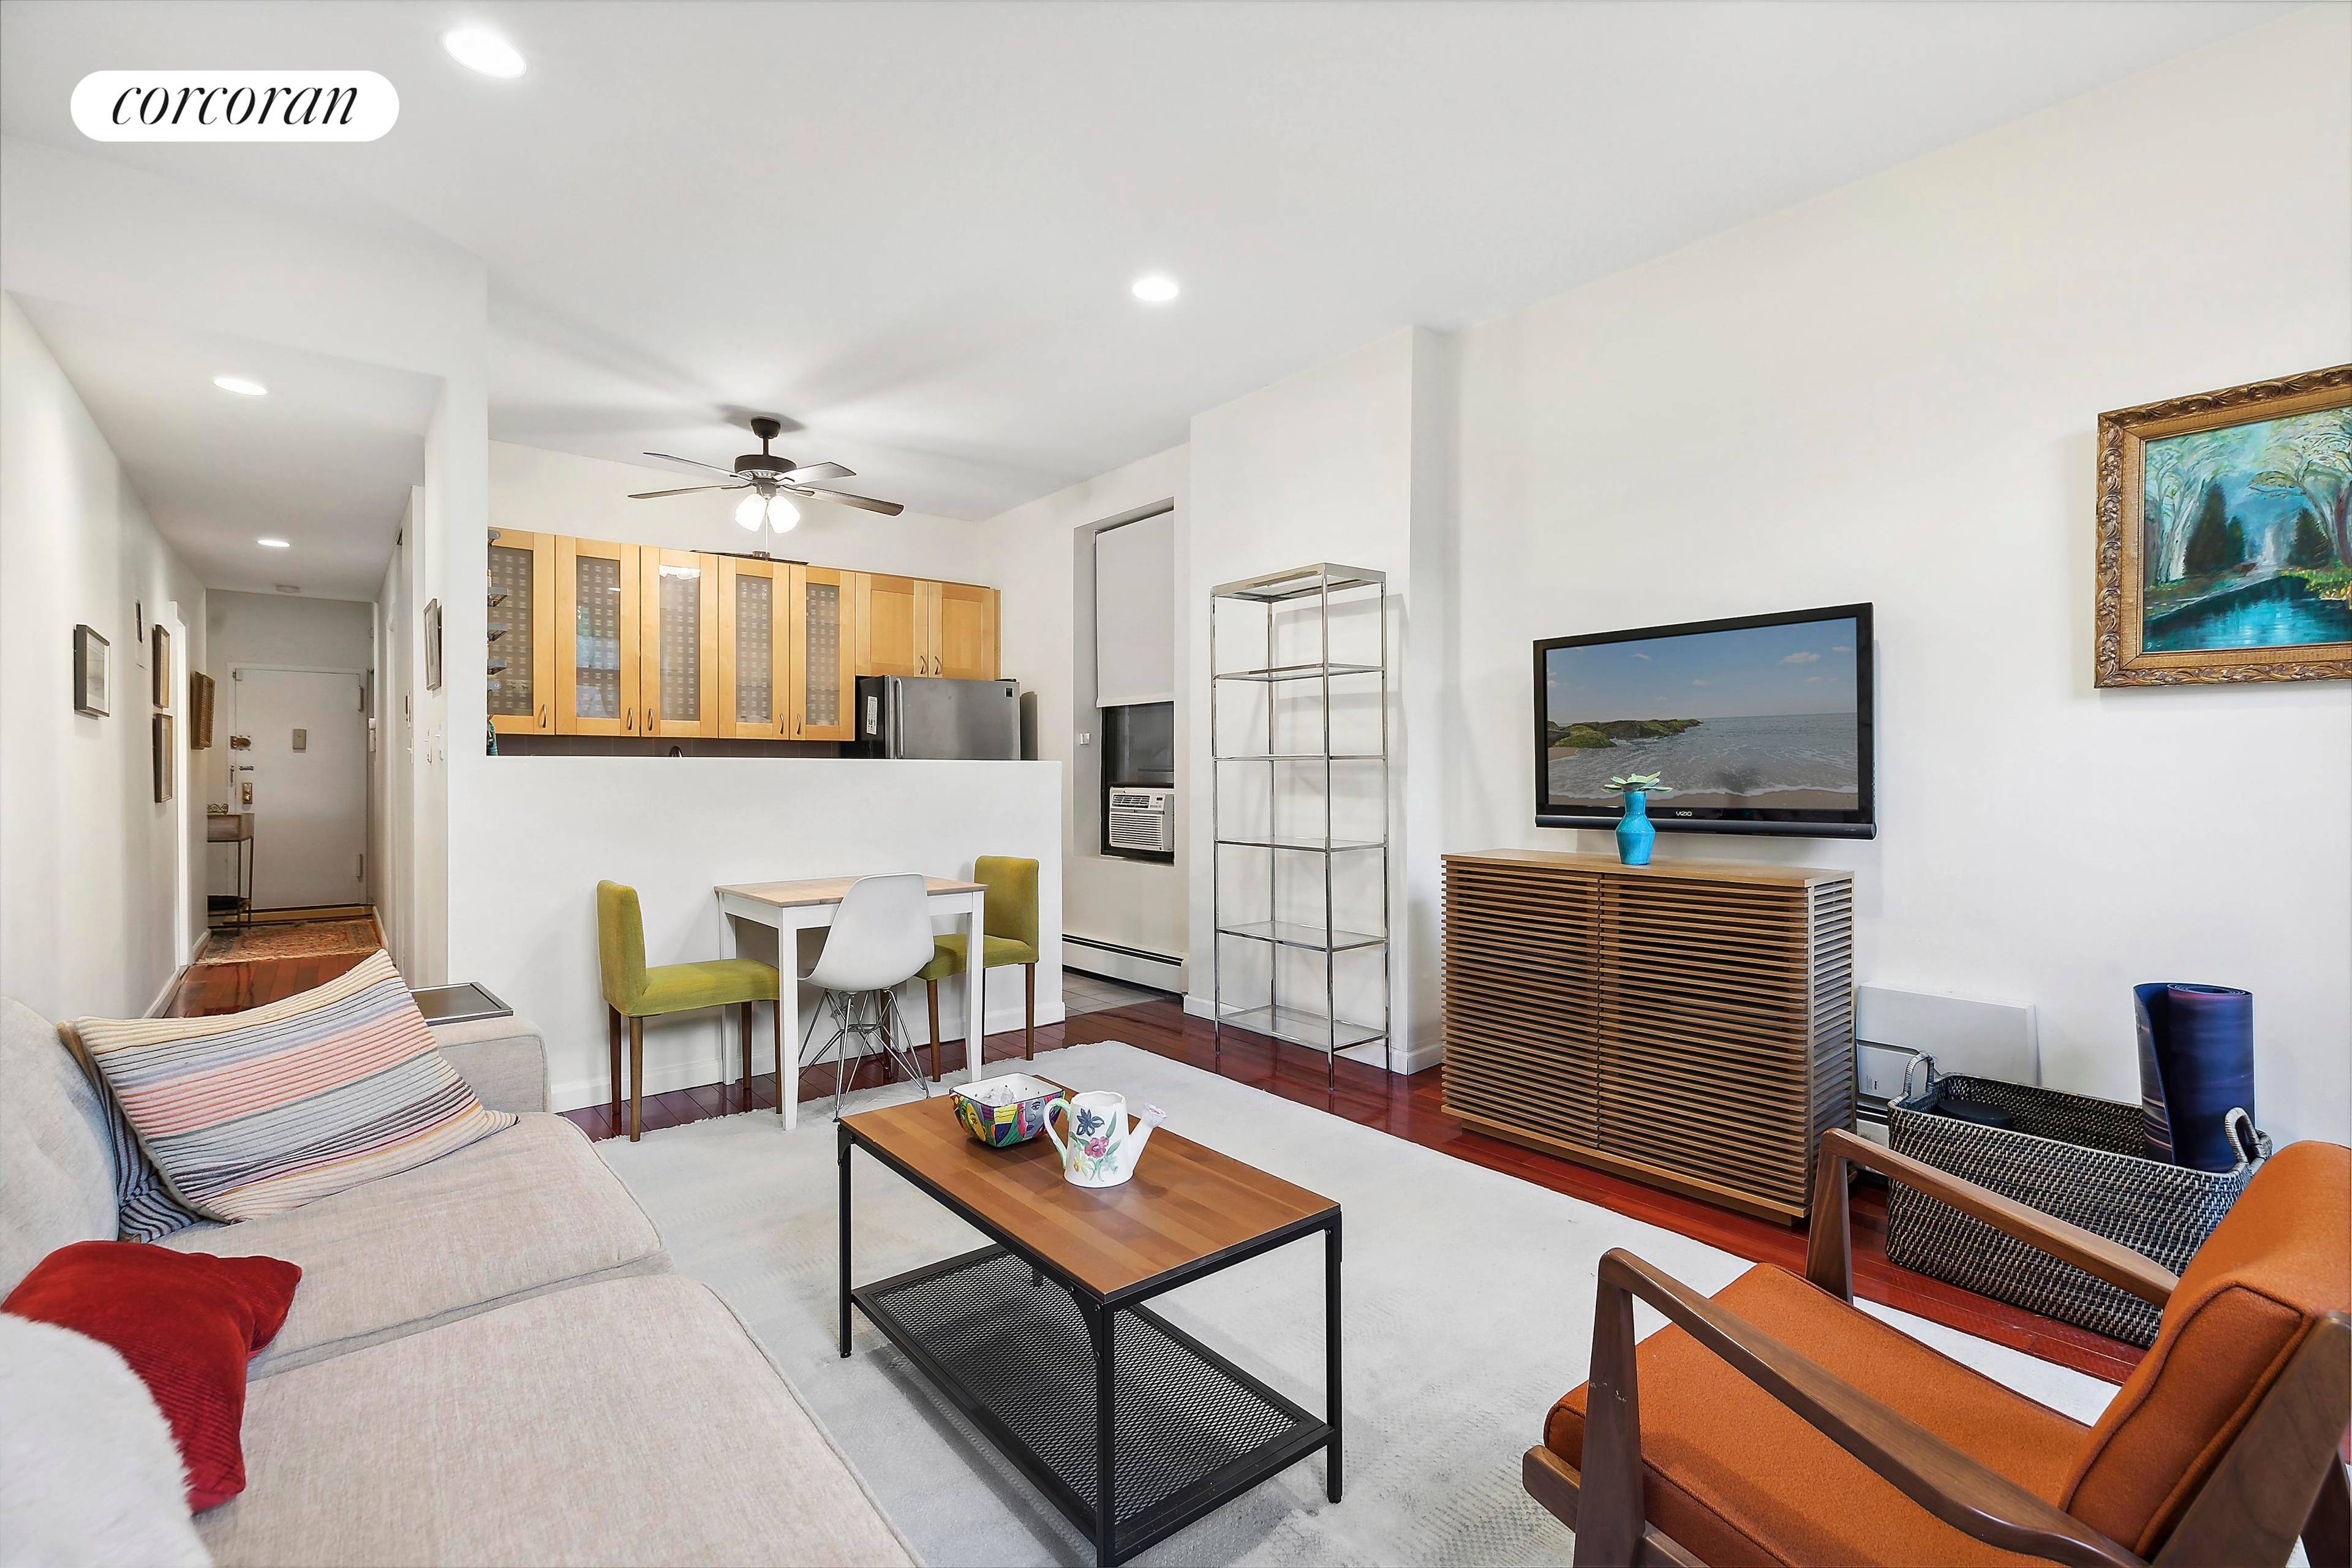 Rare opportunity to own a one bedroom apartment with private outdoor space in the heart of Park Slope !